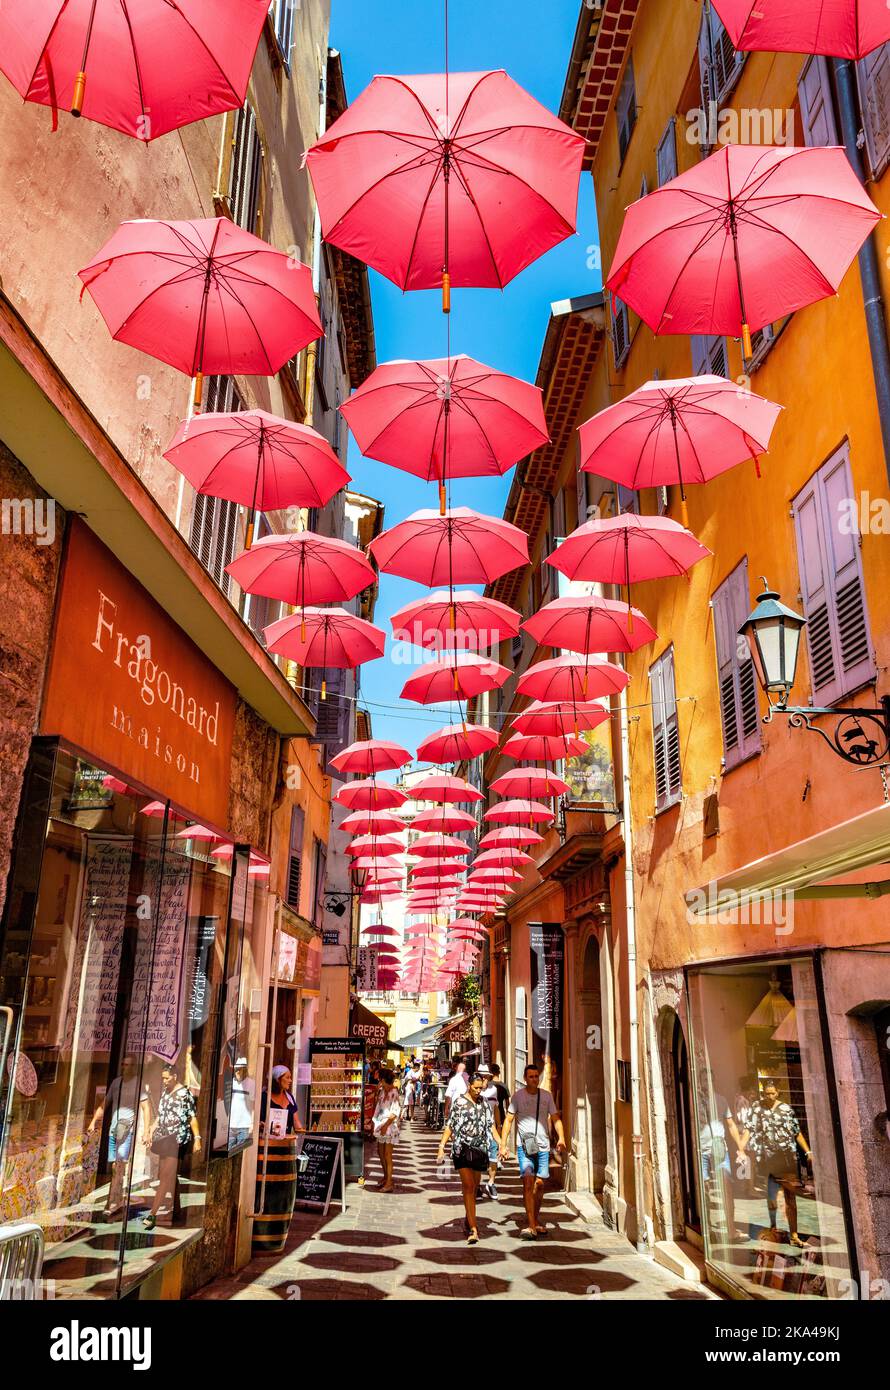 Grasse France August 6 2022 Historic Tenement Houses And Narrow Streets Decorated With Pink Umbrellas Of Old Town Quarter Of Perfumery City 2KA49KJ 